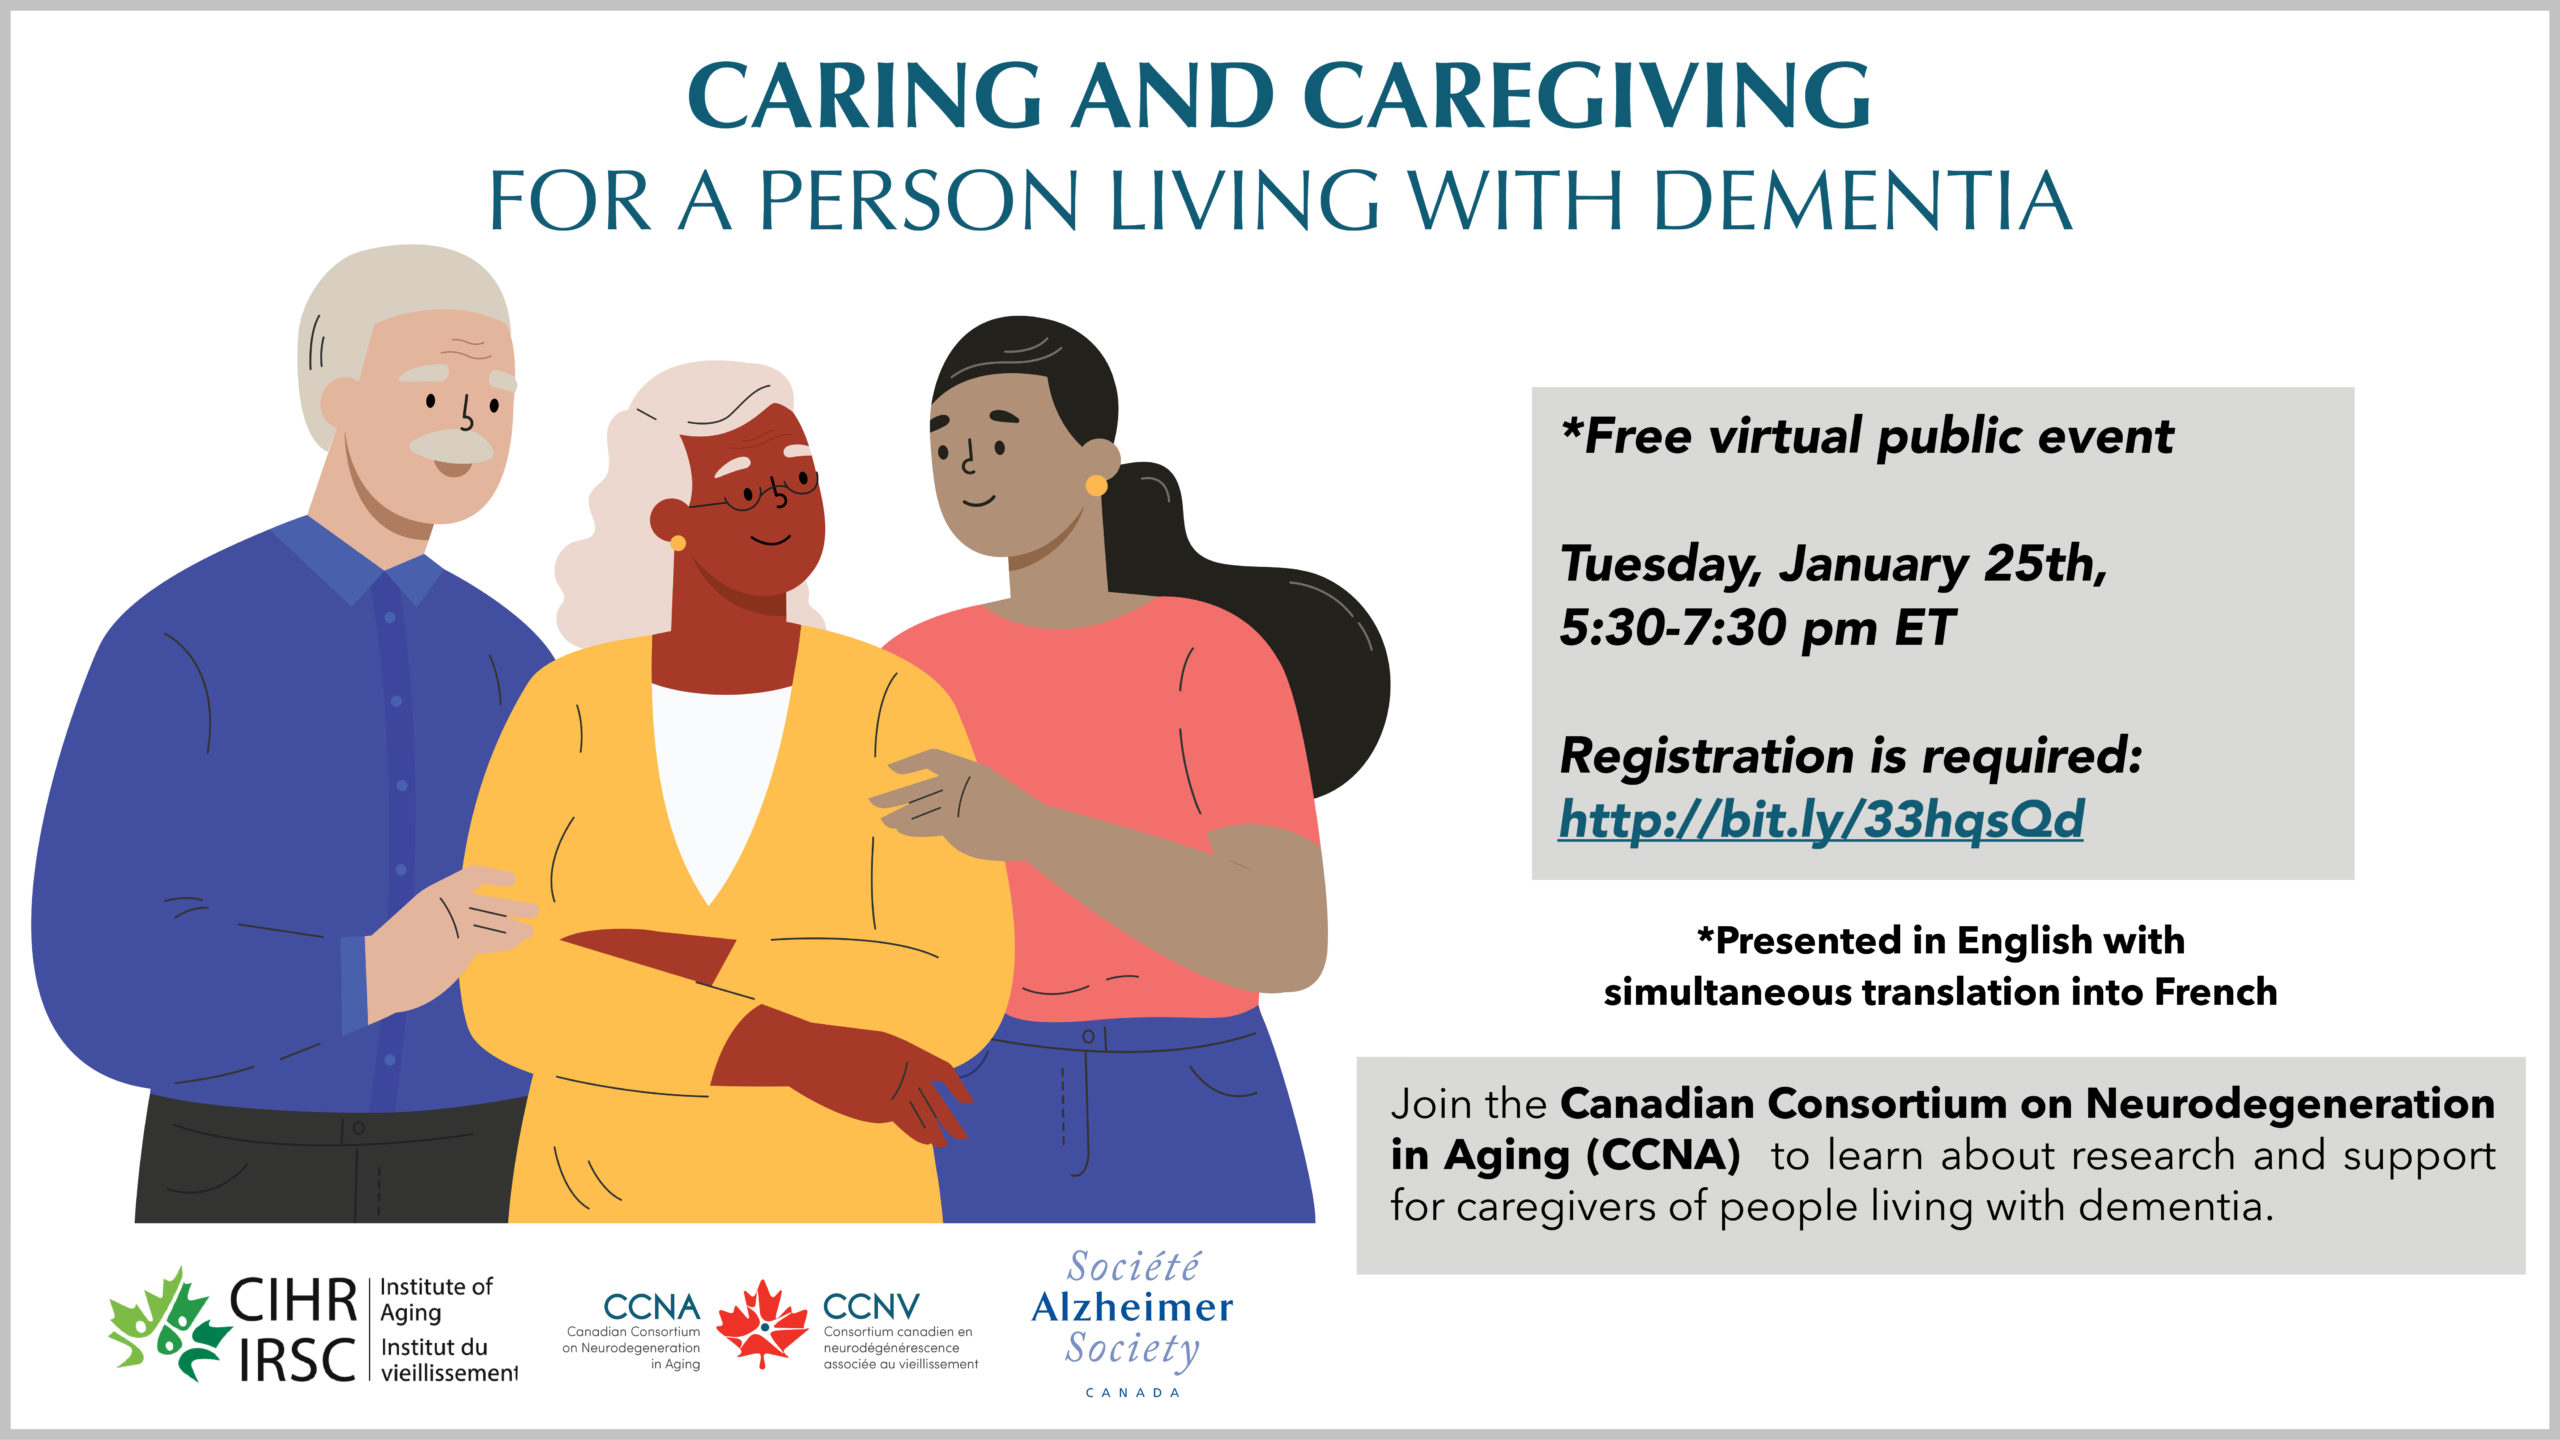 Caring and Caregiving for a Person Living with Dementia: January 25th at 5:30 PM ET.